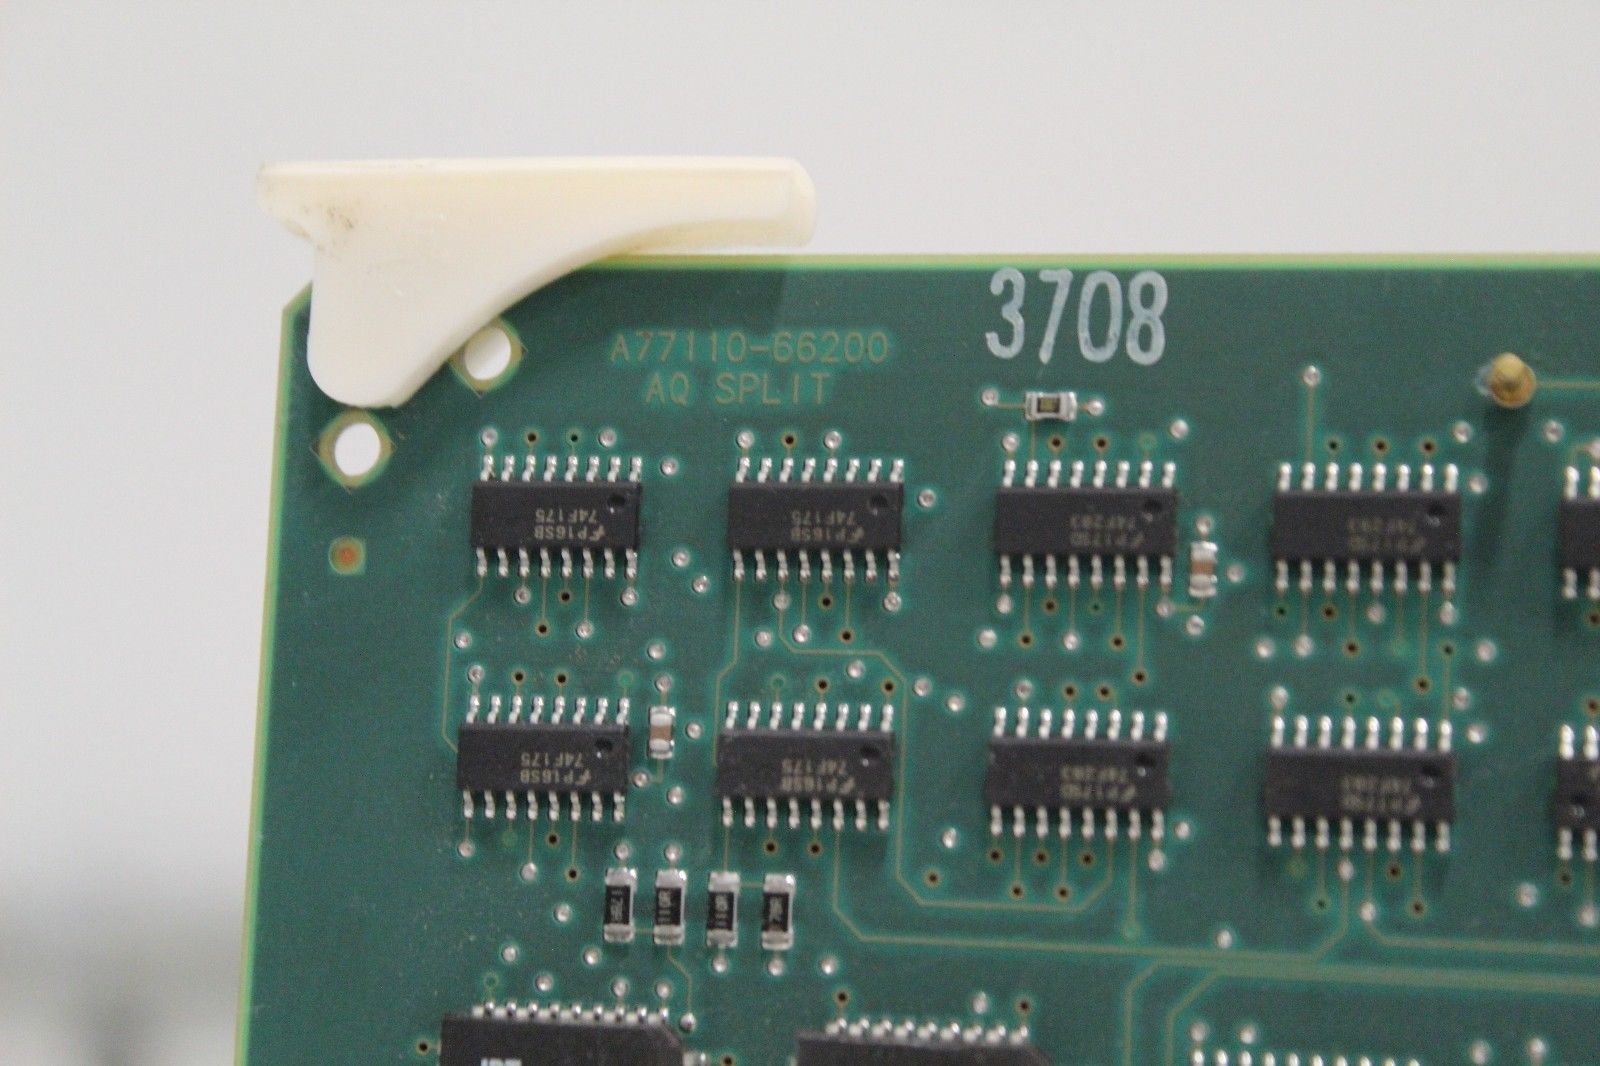 a close up of a printed circuit board